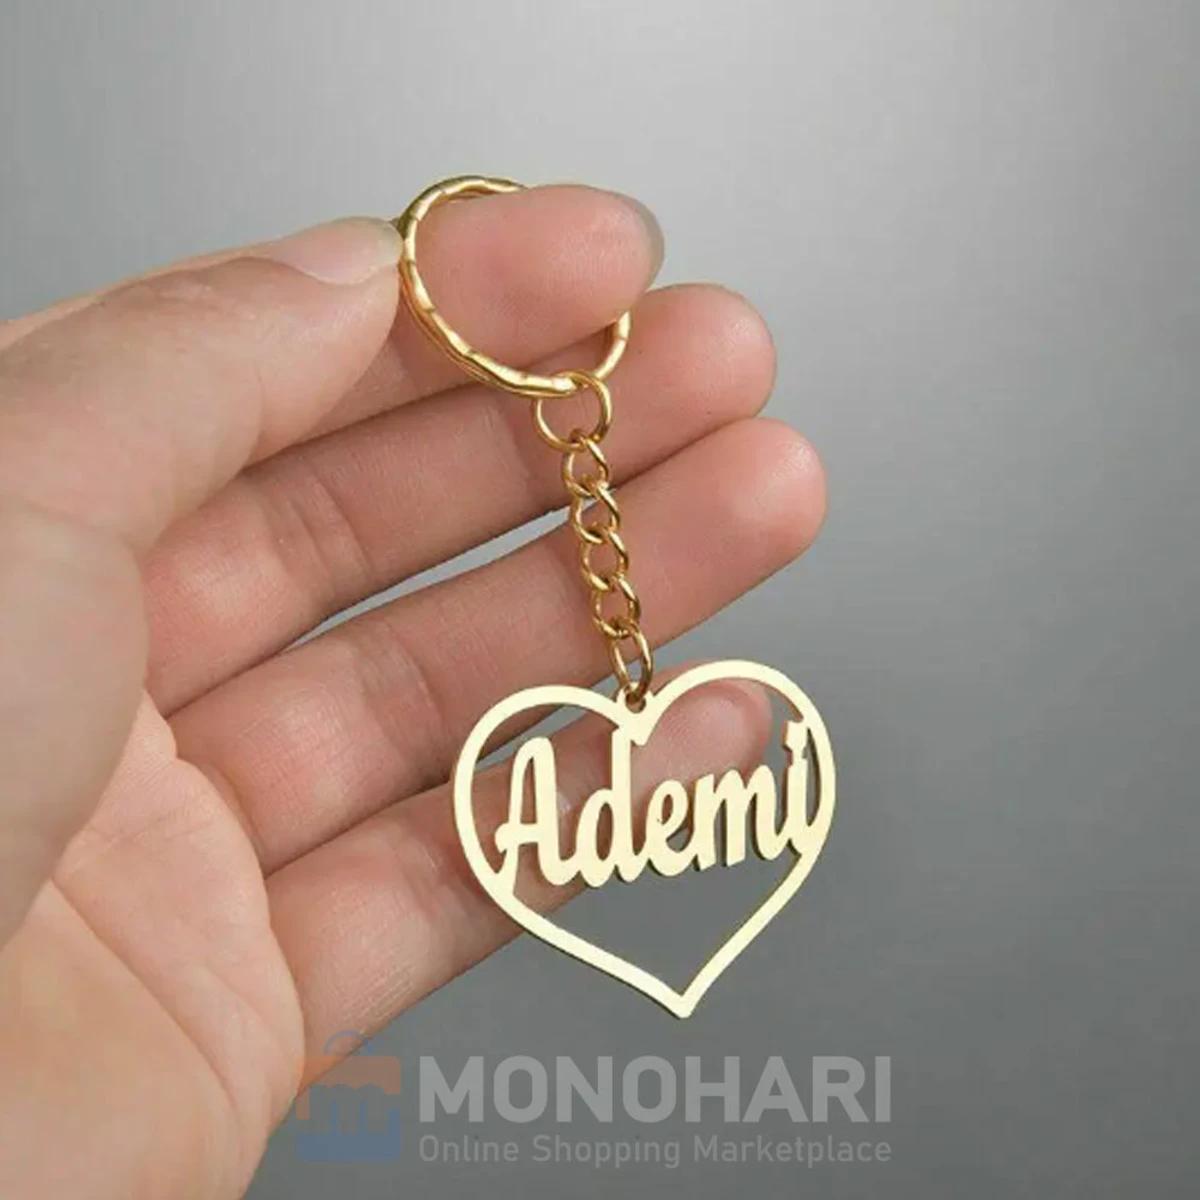 Single Name Key Ring (Ademi) Covered with Heart Shape 22K Gold Plated Customized Key Ring